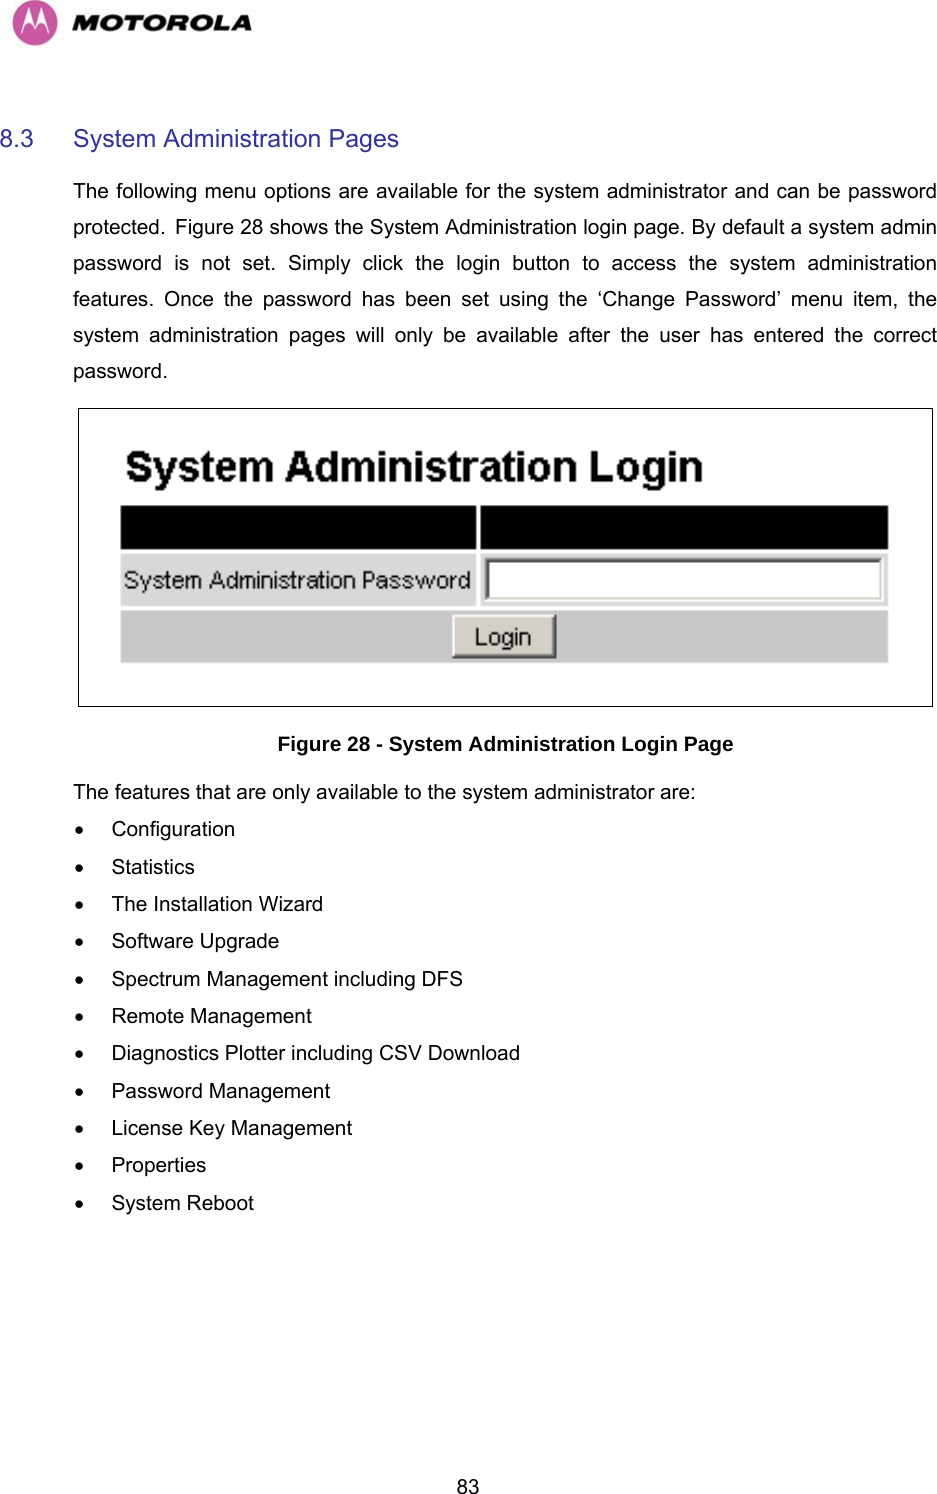   838.3  System Administration Pages  The following menu options are available for the system administrator and can be password protected. HFigure 28 shows the System Administration login page. By default a system admin password is not set. Simply click the login button to access the system administration features. Once the password has been set using the ‘Change Password’ menu item, the system administration pages will only be available after the user has entered the correct password.  Figure 28 - System Administration Login Page The features that are only available to the system administrator are: • Configuration • Statistics •  The Installation Wizard • Software Upgrade •  Spectrum Management including DFS • Remote Management •  Diagnostics Plotter including CSV Download • Password Management •  License Key Management • Properties • System Reboot 